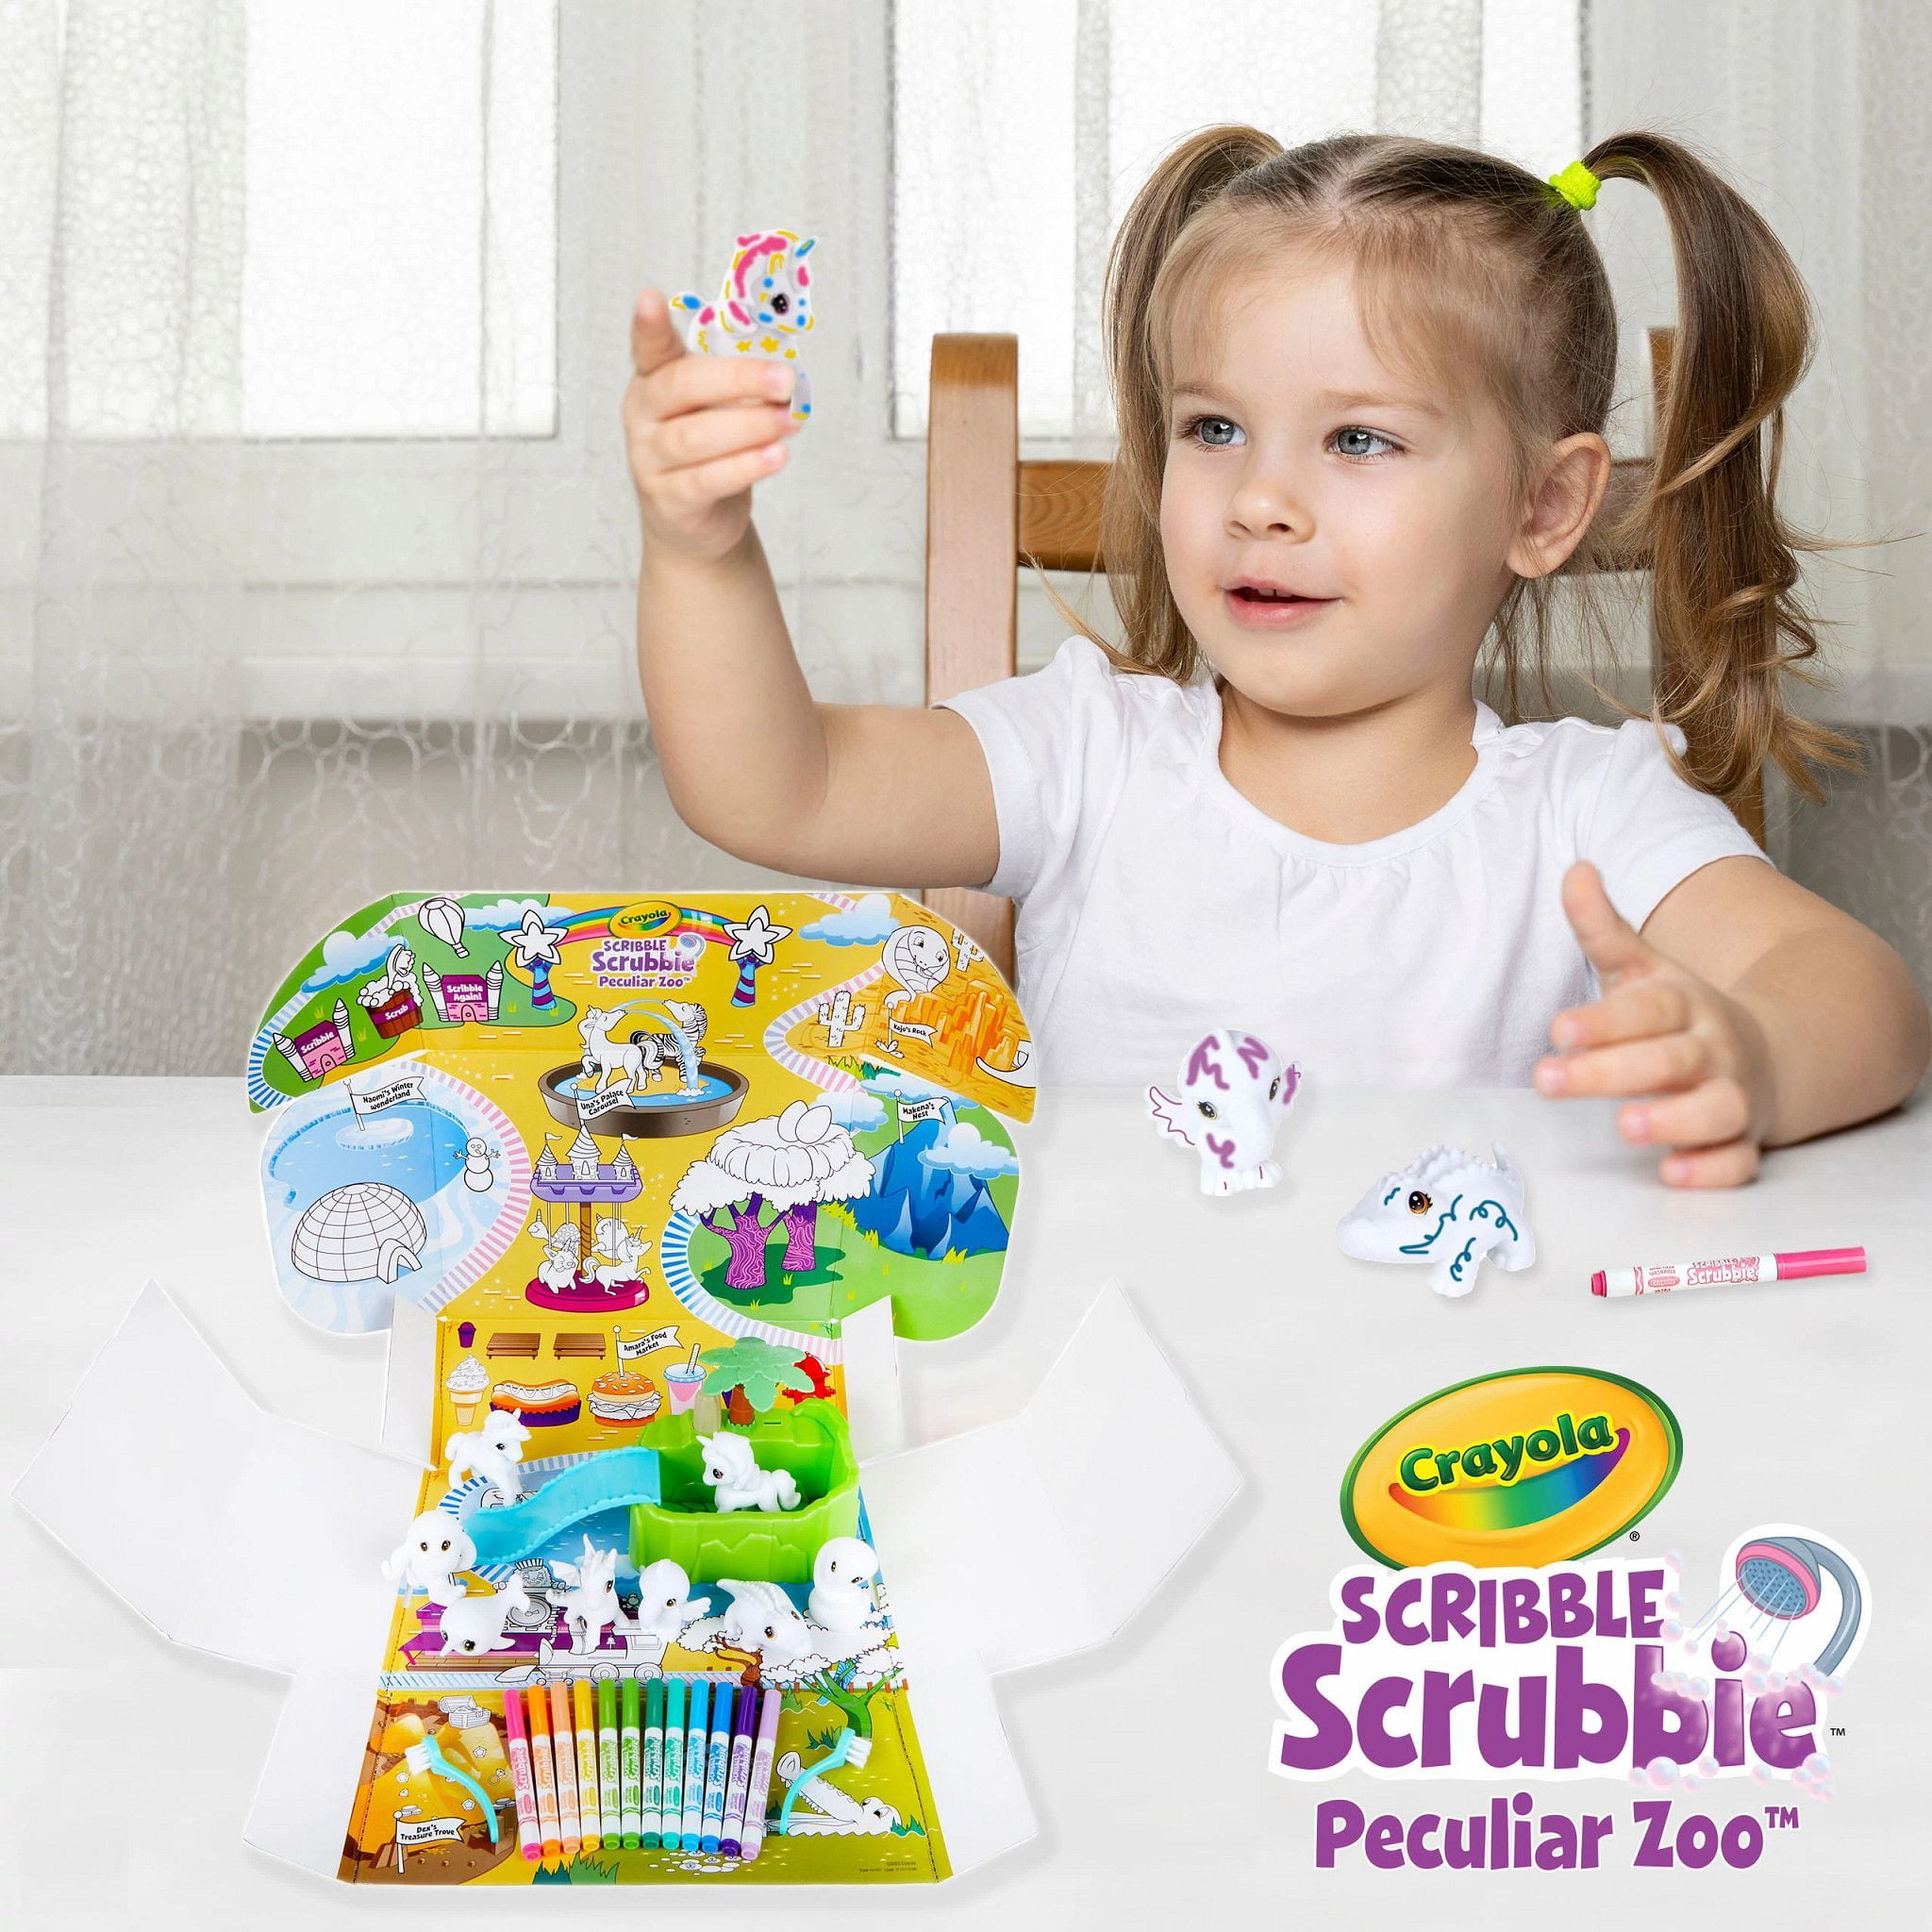 Crayola Scribble Scrubbie Peculiar Pets, Kids Toys, Gift for Kids